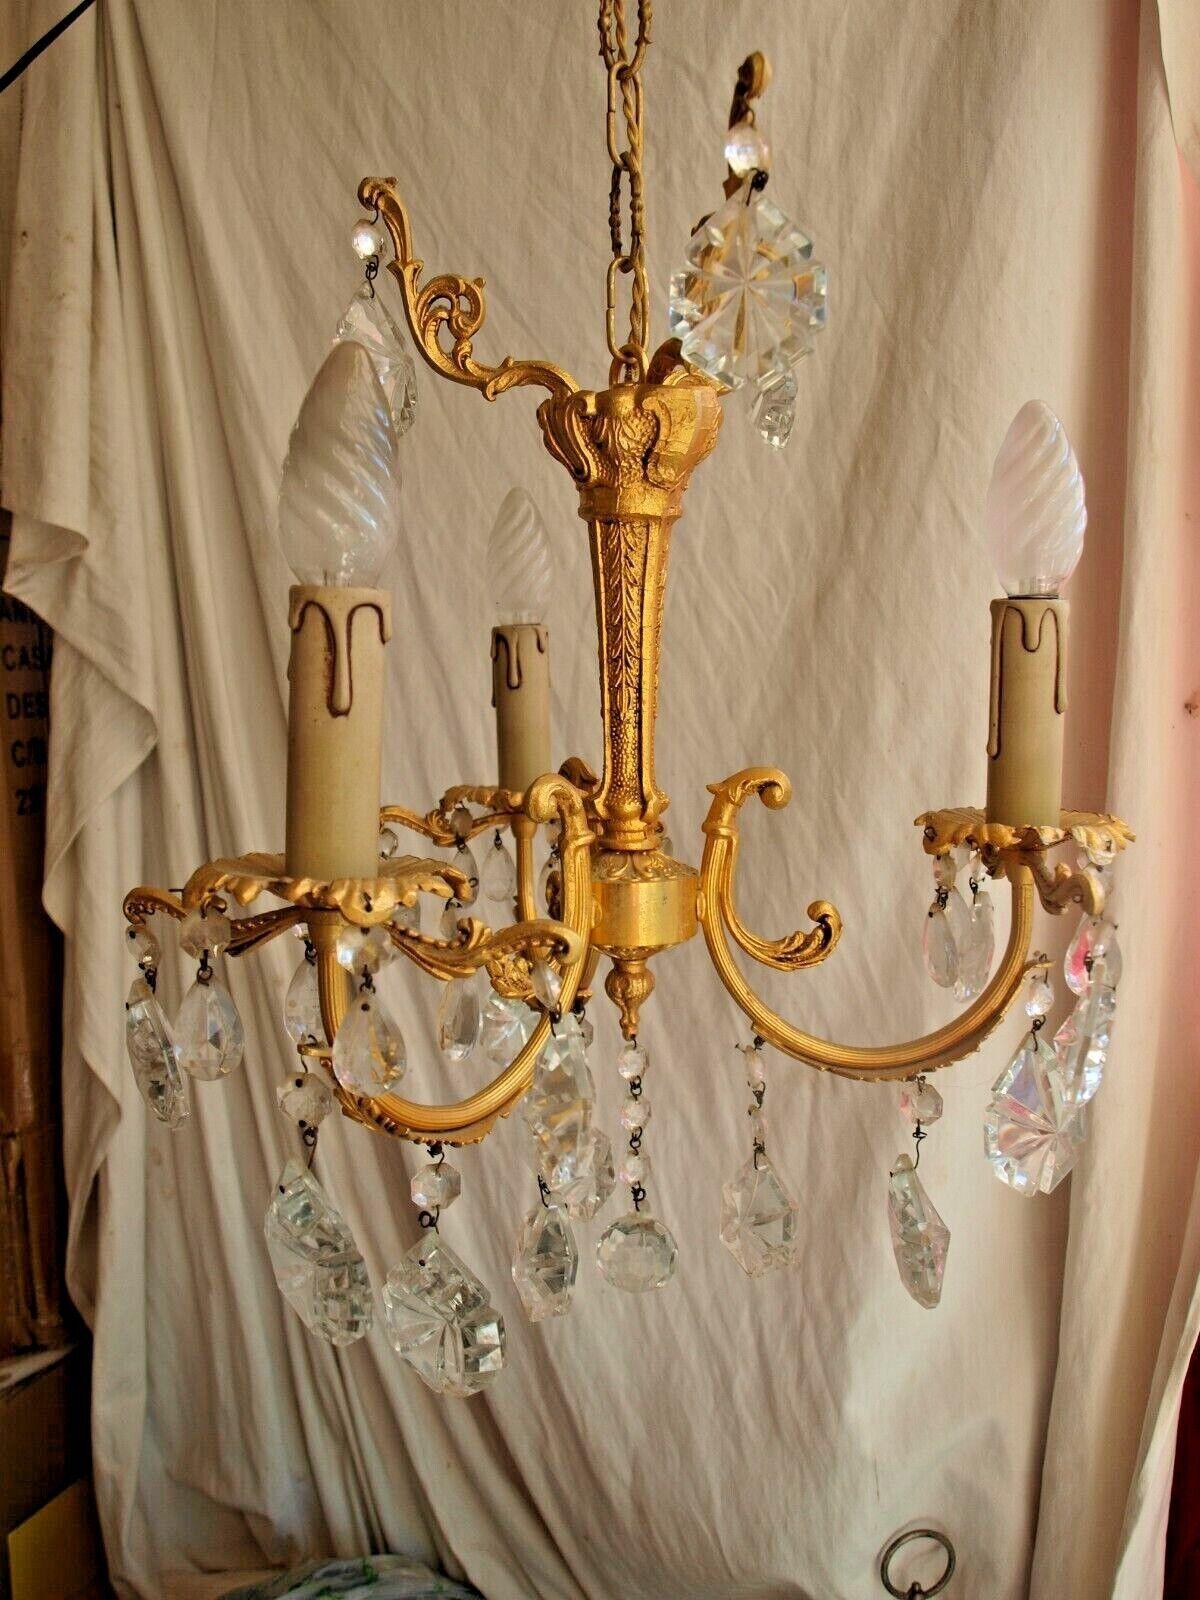 Early 20th Century c1900 French Louis XIV Rococo Form Gilt Bronze w/ith Cut Crystal Chandelier For Sale